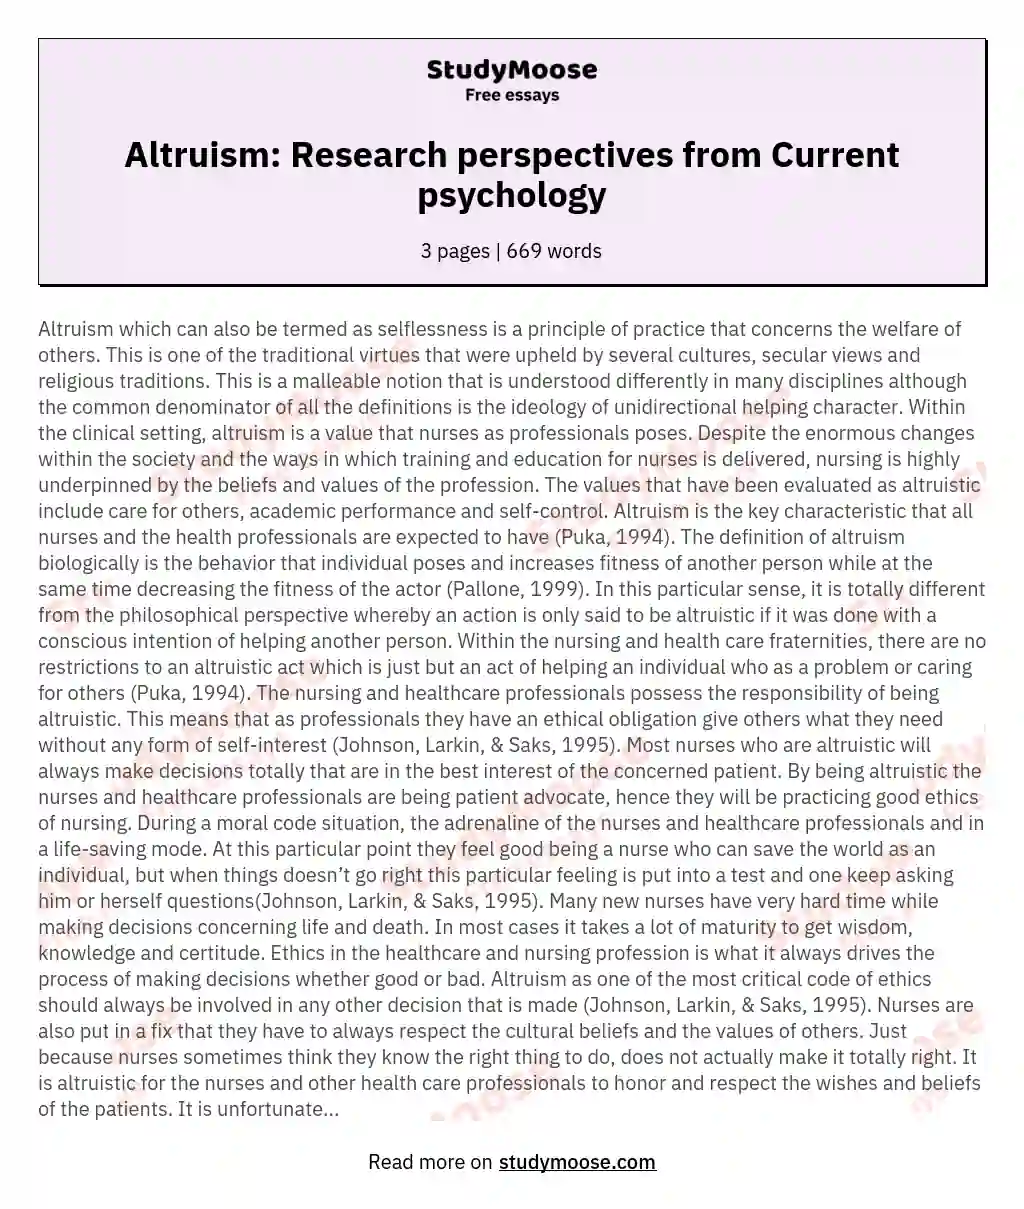 Altruism: Research perspectives from Current psychology essay